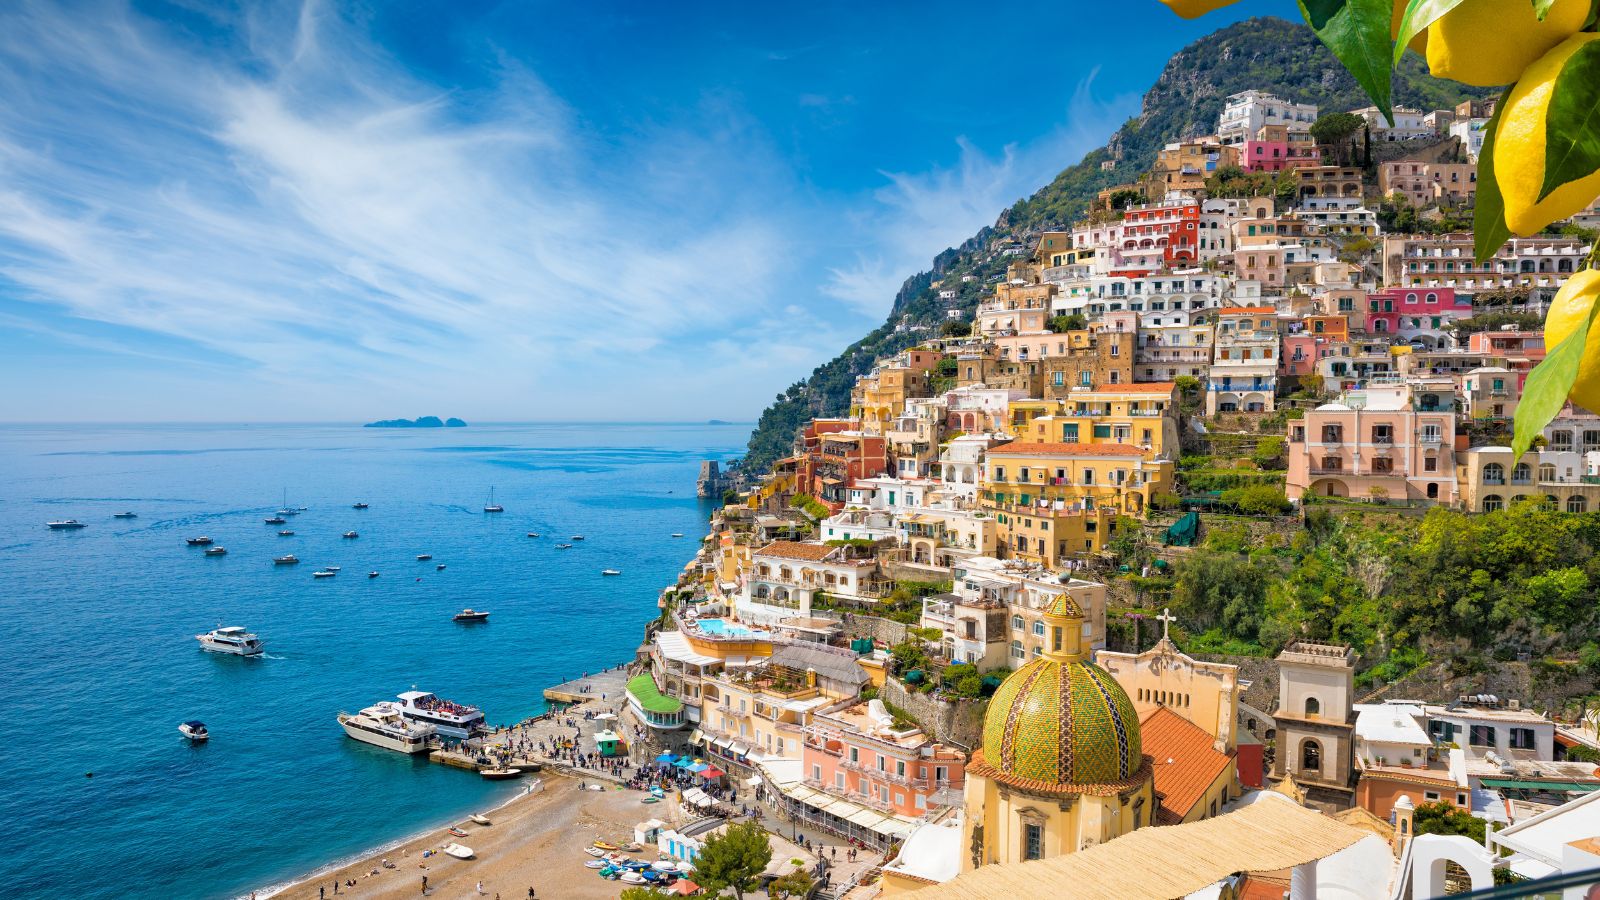 <p>Positano and Cinque Terre can be hard to move around due to the packed streets. While they both have relatively small populations, <a href="https://www.travelweekly.com/Hotels/Positano-Italy/Spotlight">Travel Weekly</a> says Positano’s “number may triple or quadruple in the height of the tourist season.” In Cinque Terre, “the number of tourists each year adds up to nearly 2.5 <a href="https://italy4real.com/a-guide-to-the-five-villages-of-cinque-terre/#:~:text=Although%20the%20resident%20population%20of,up%20to%20nearly%202.5%20million.">million</a>,” says Italy Real. This is because everyone has the same idea of heading to Italy during the summer due to the posts they see all over social media.</p>